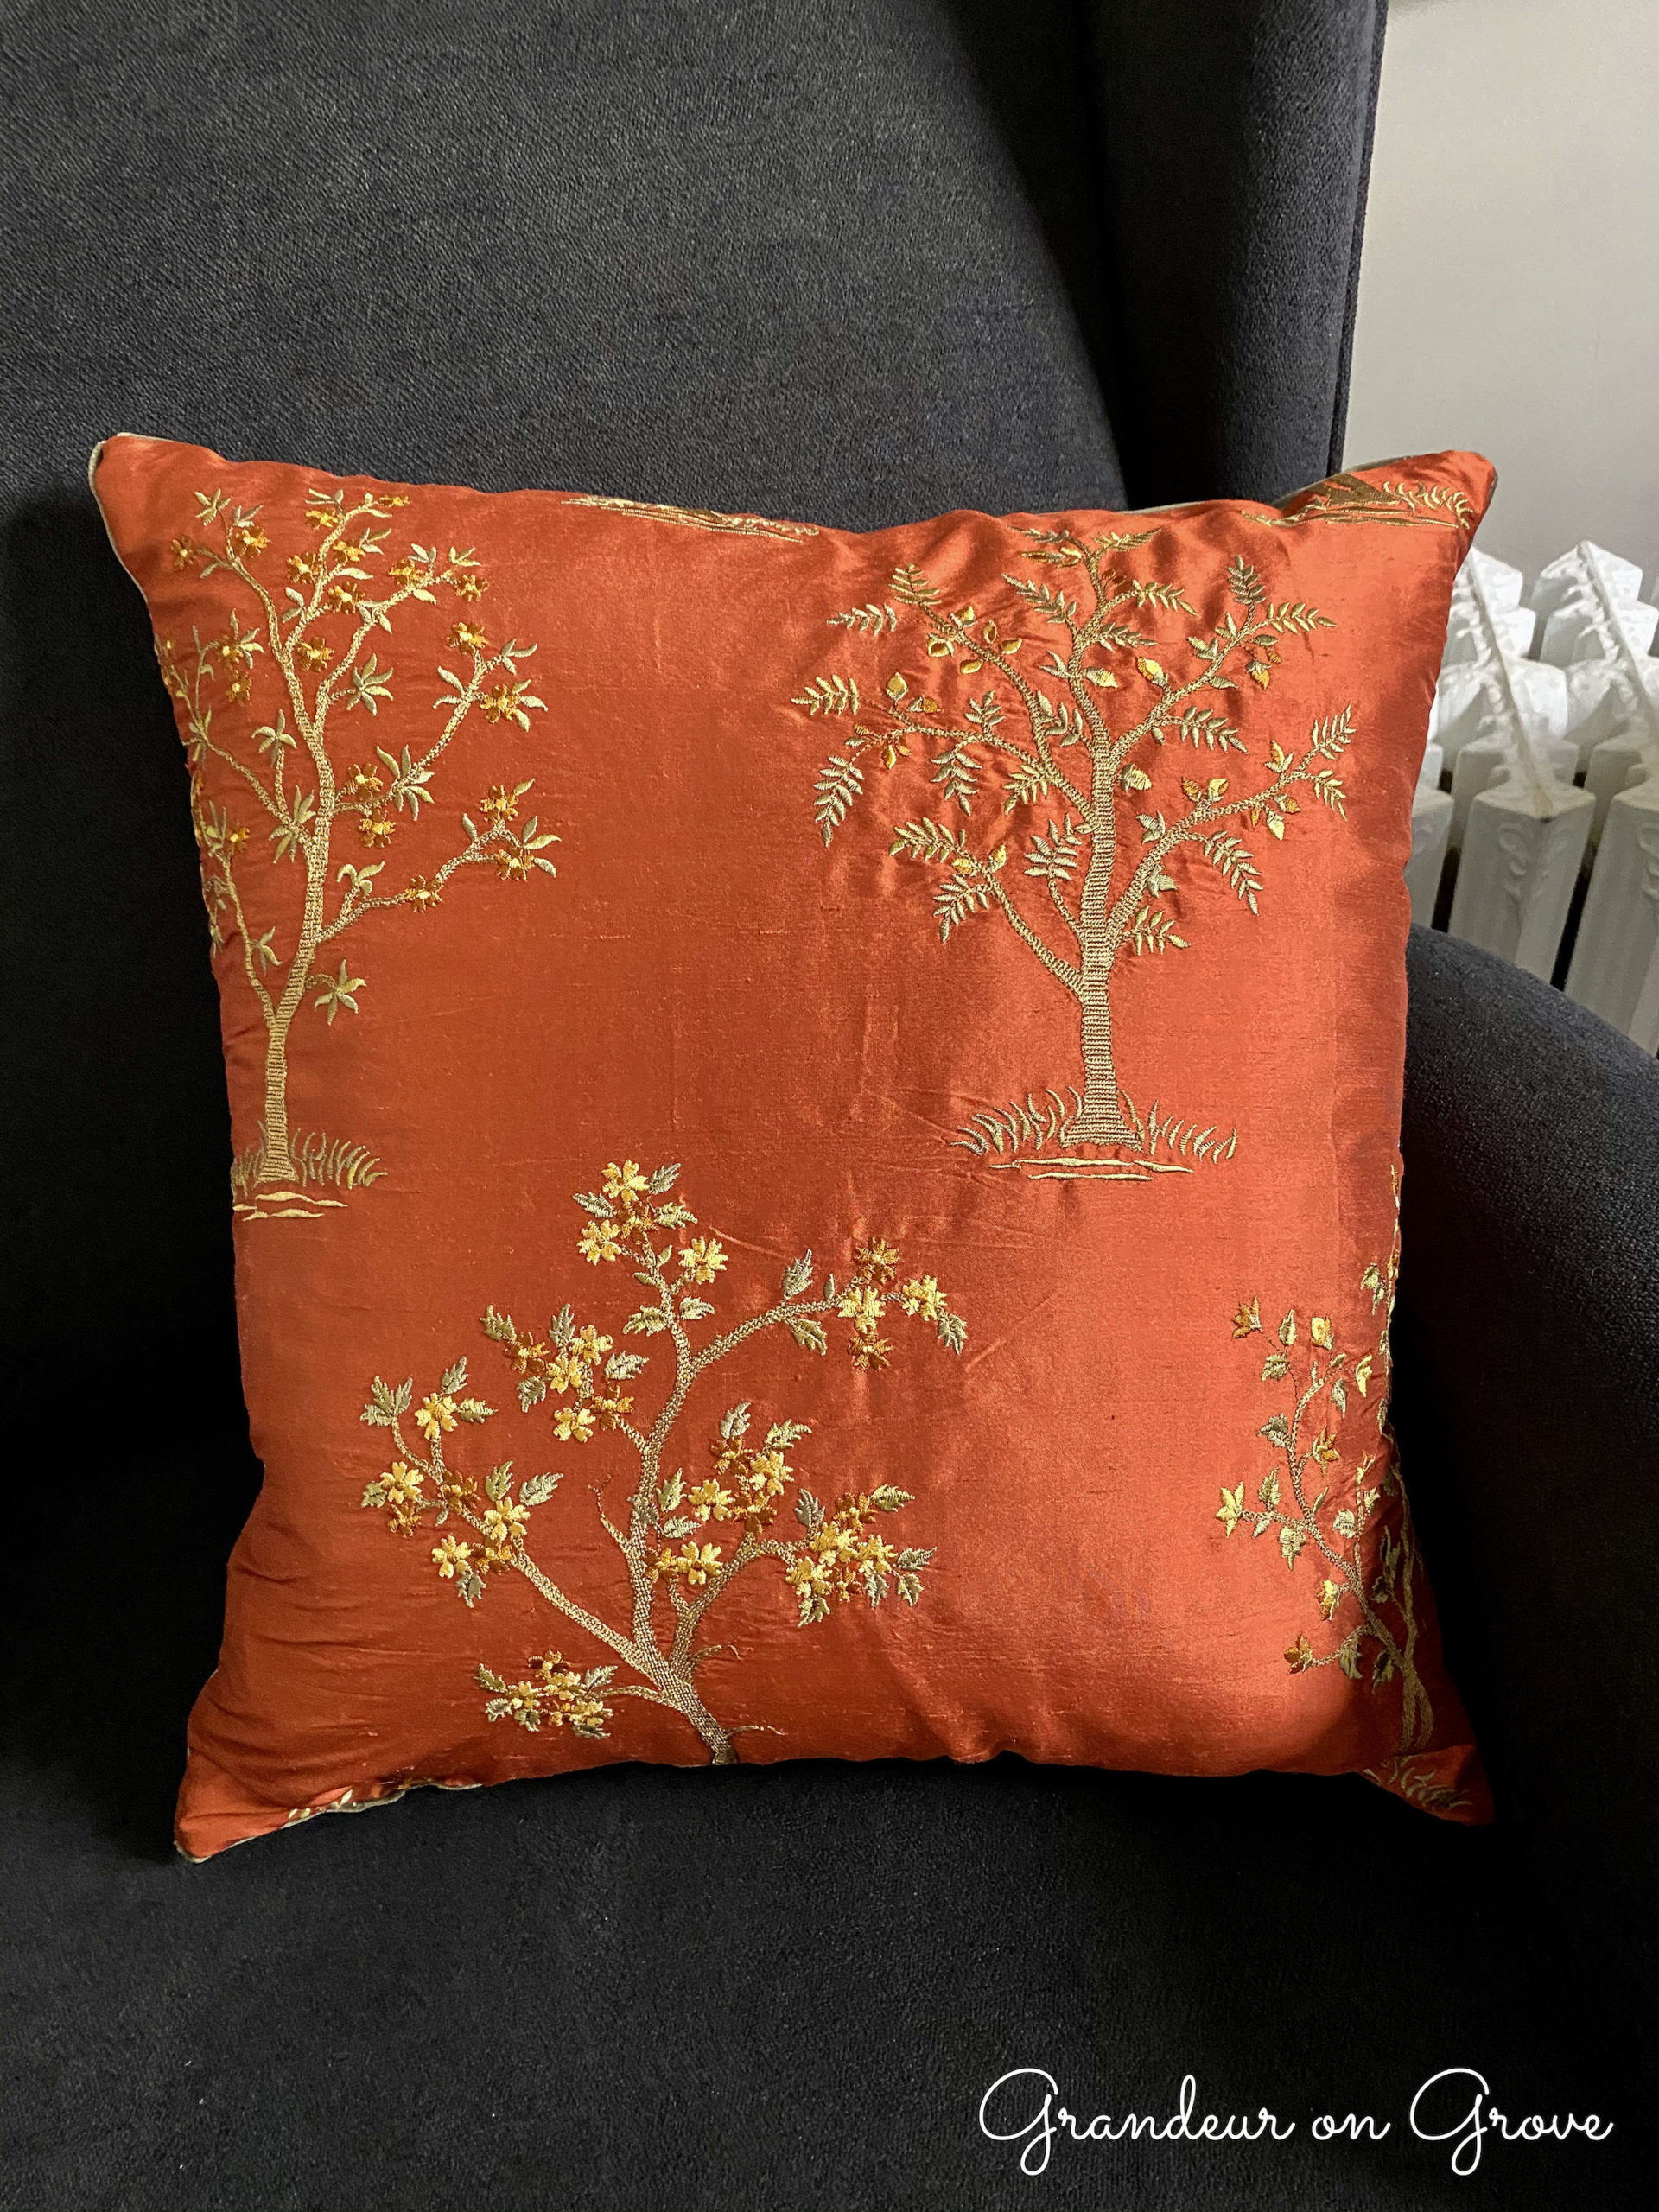 A silk embroidered pillow depicting trees